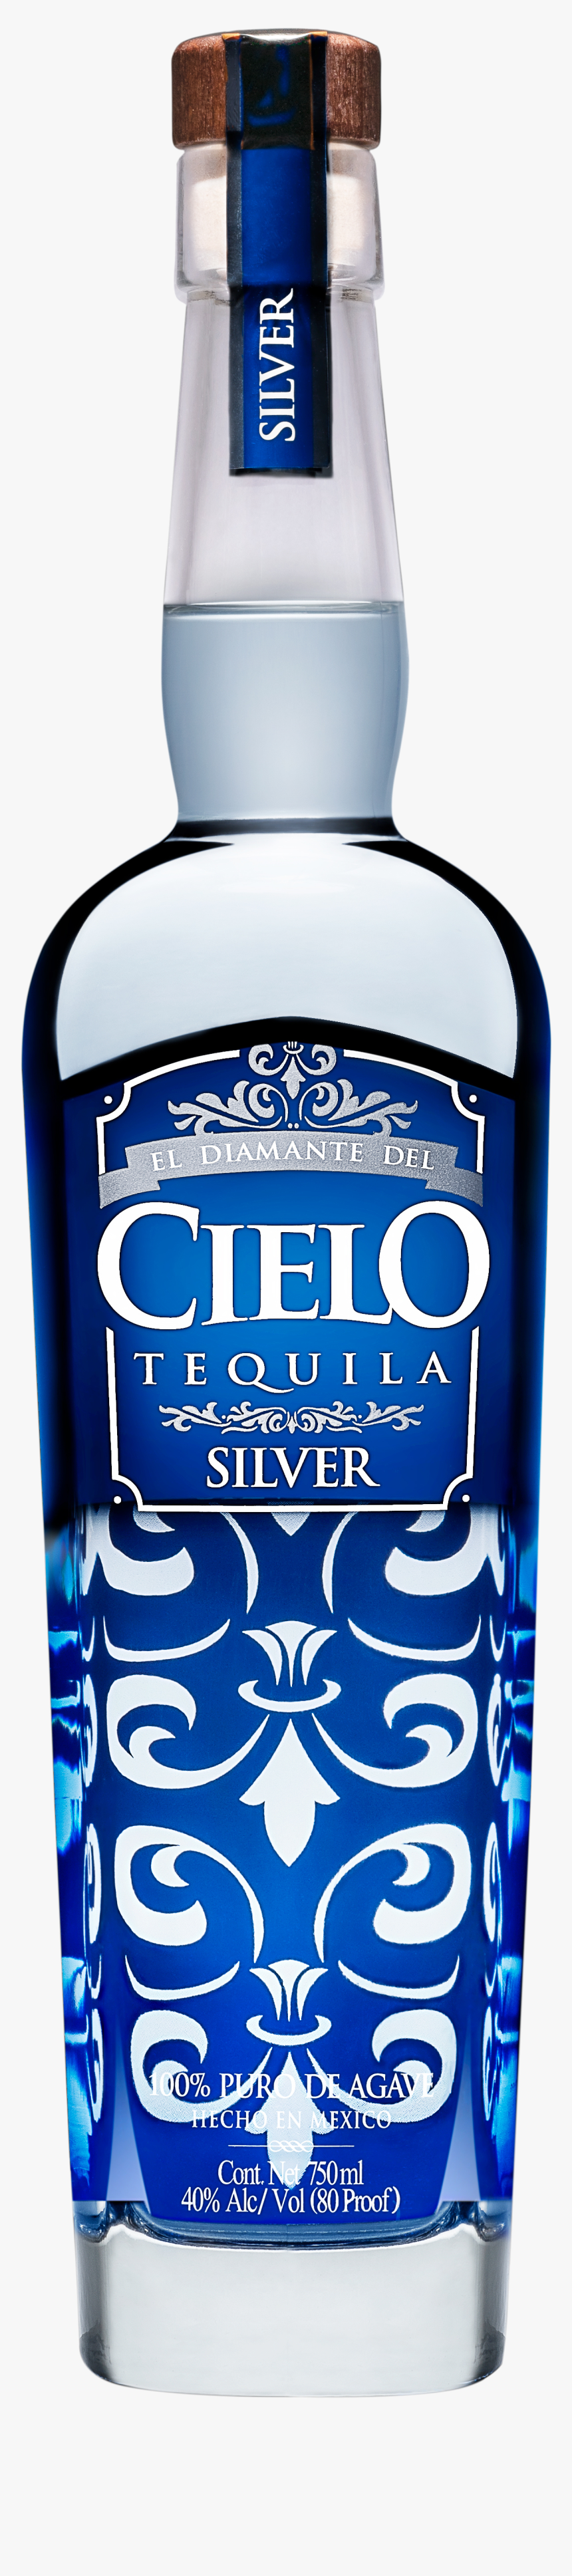 Cielo Anejo Tequila Price, HD Png Download, Free Download